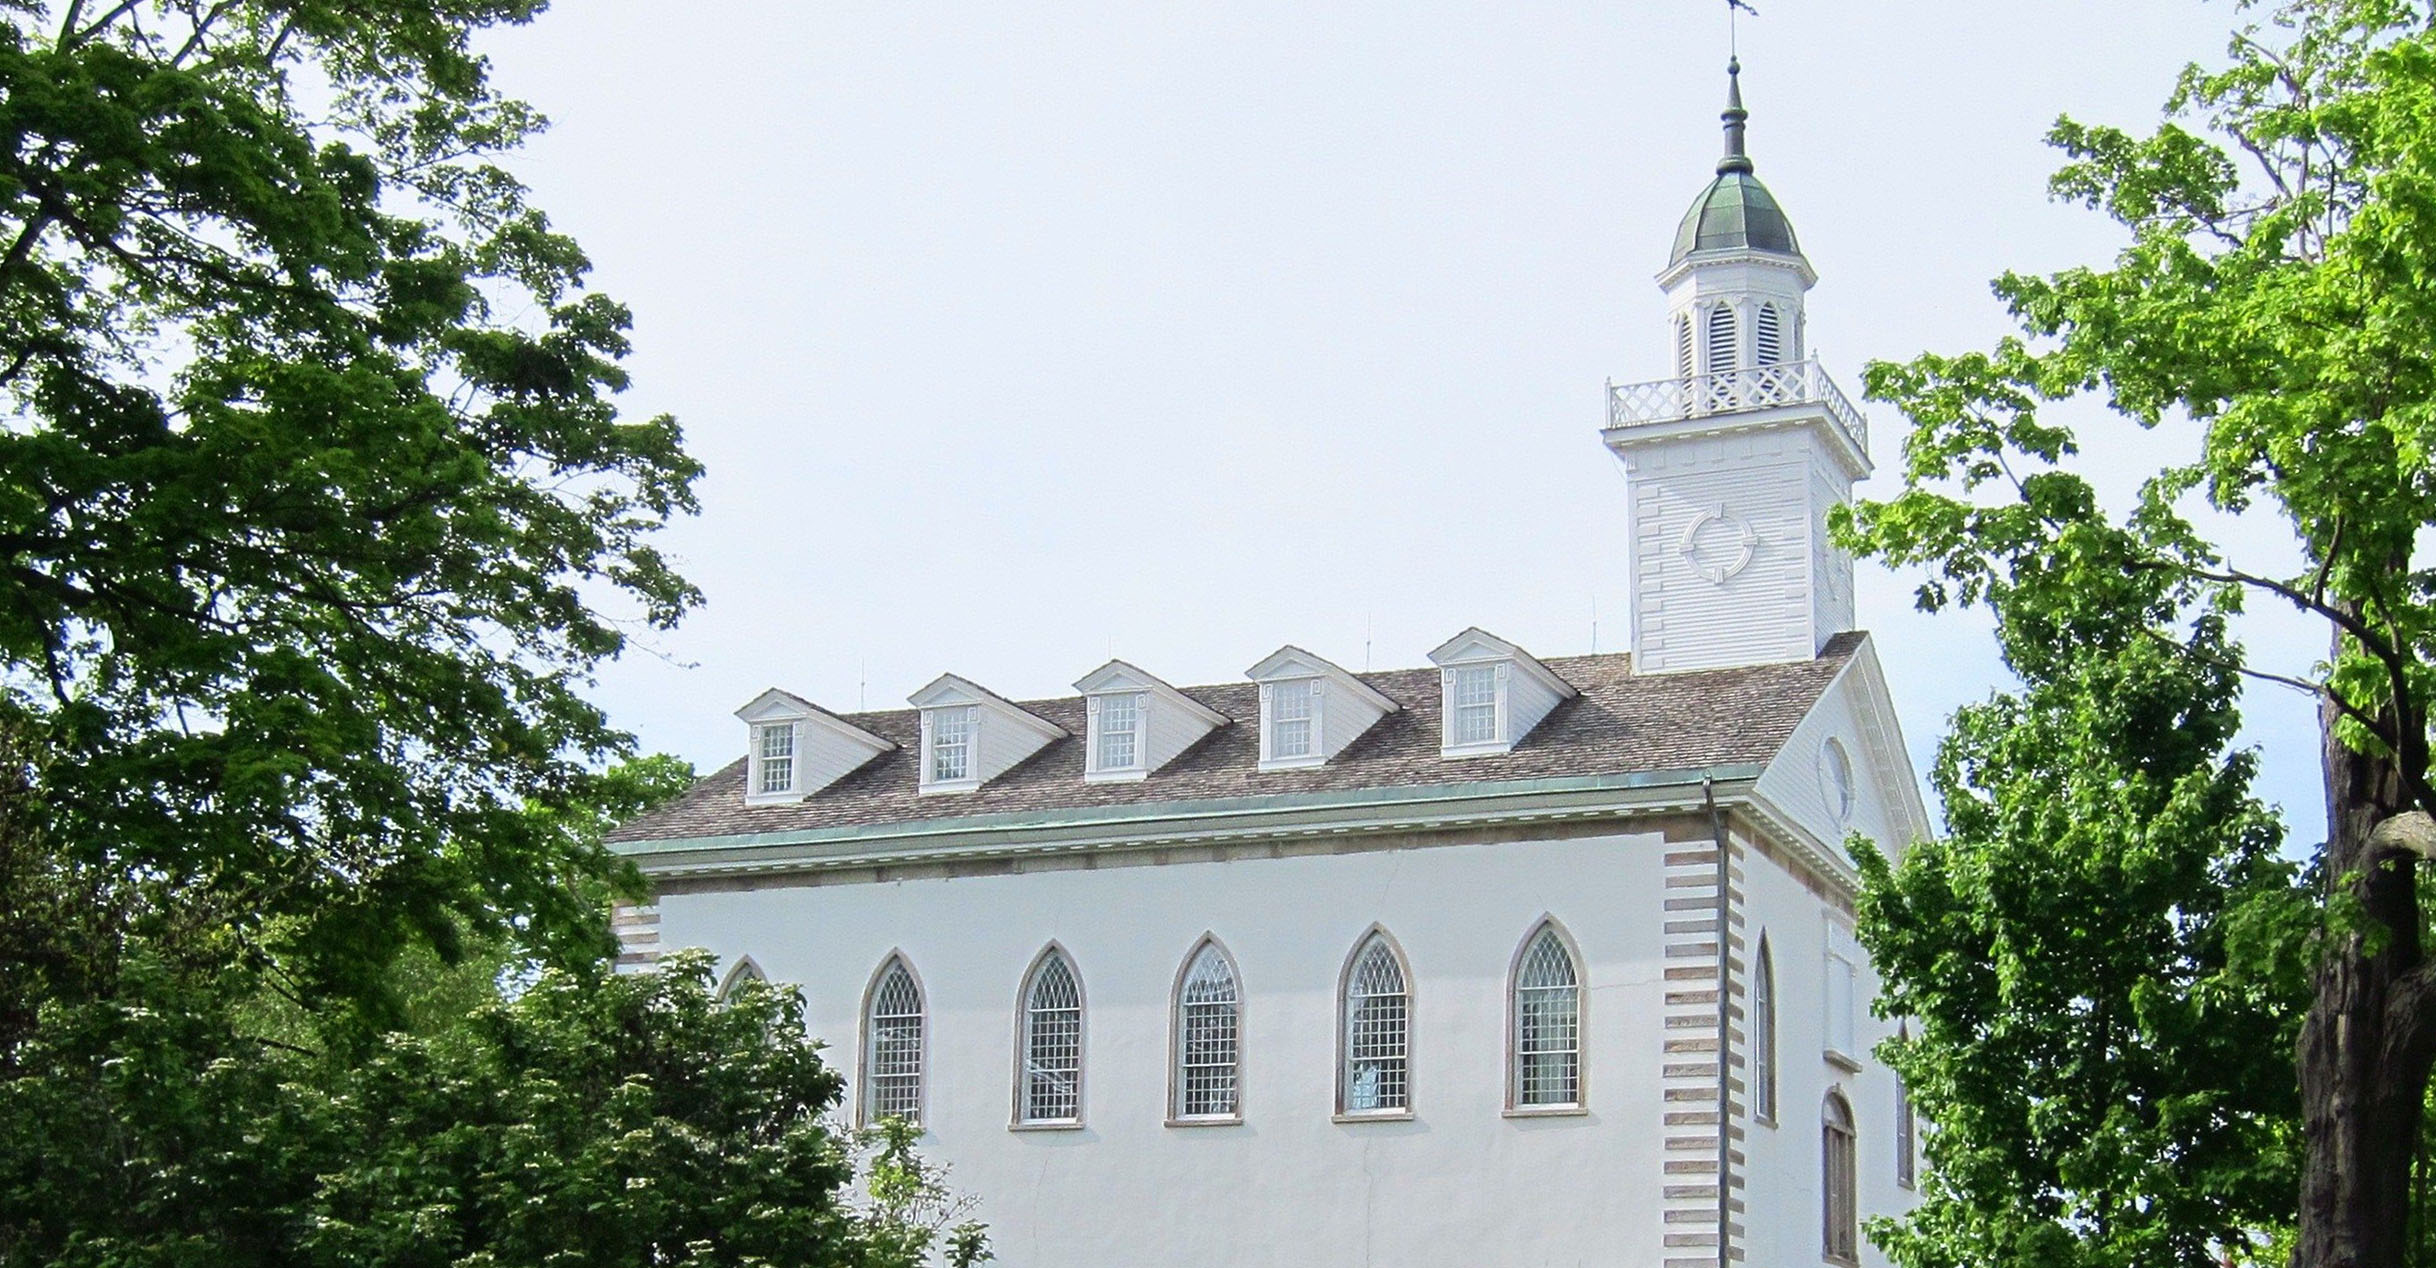 Side view of the Kirtland Temple in summertime.